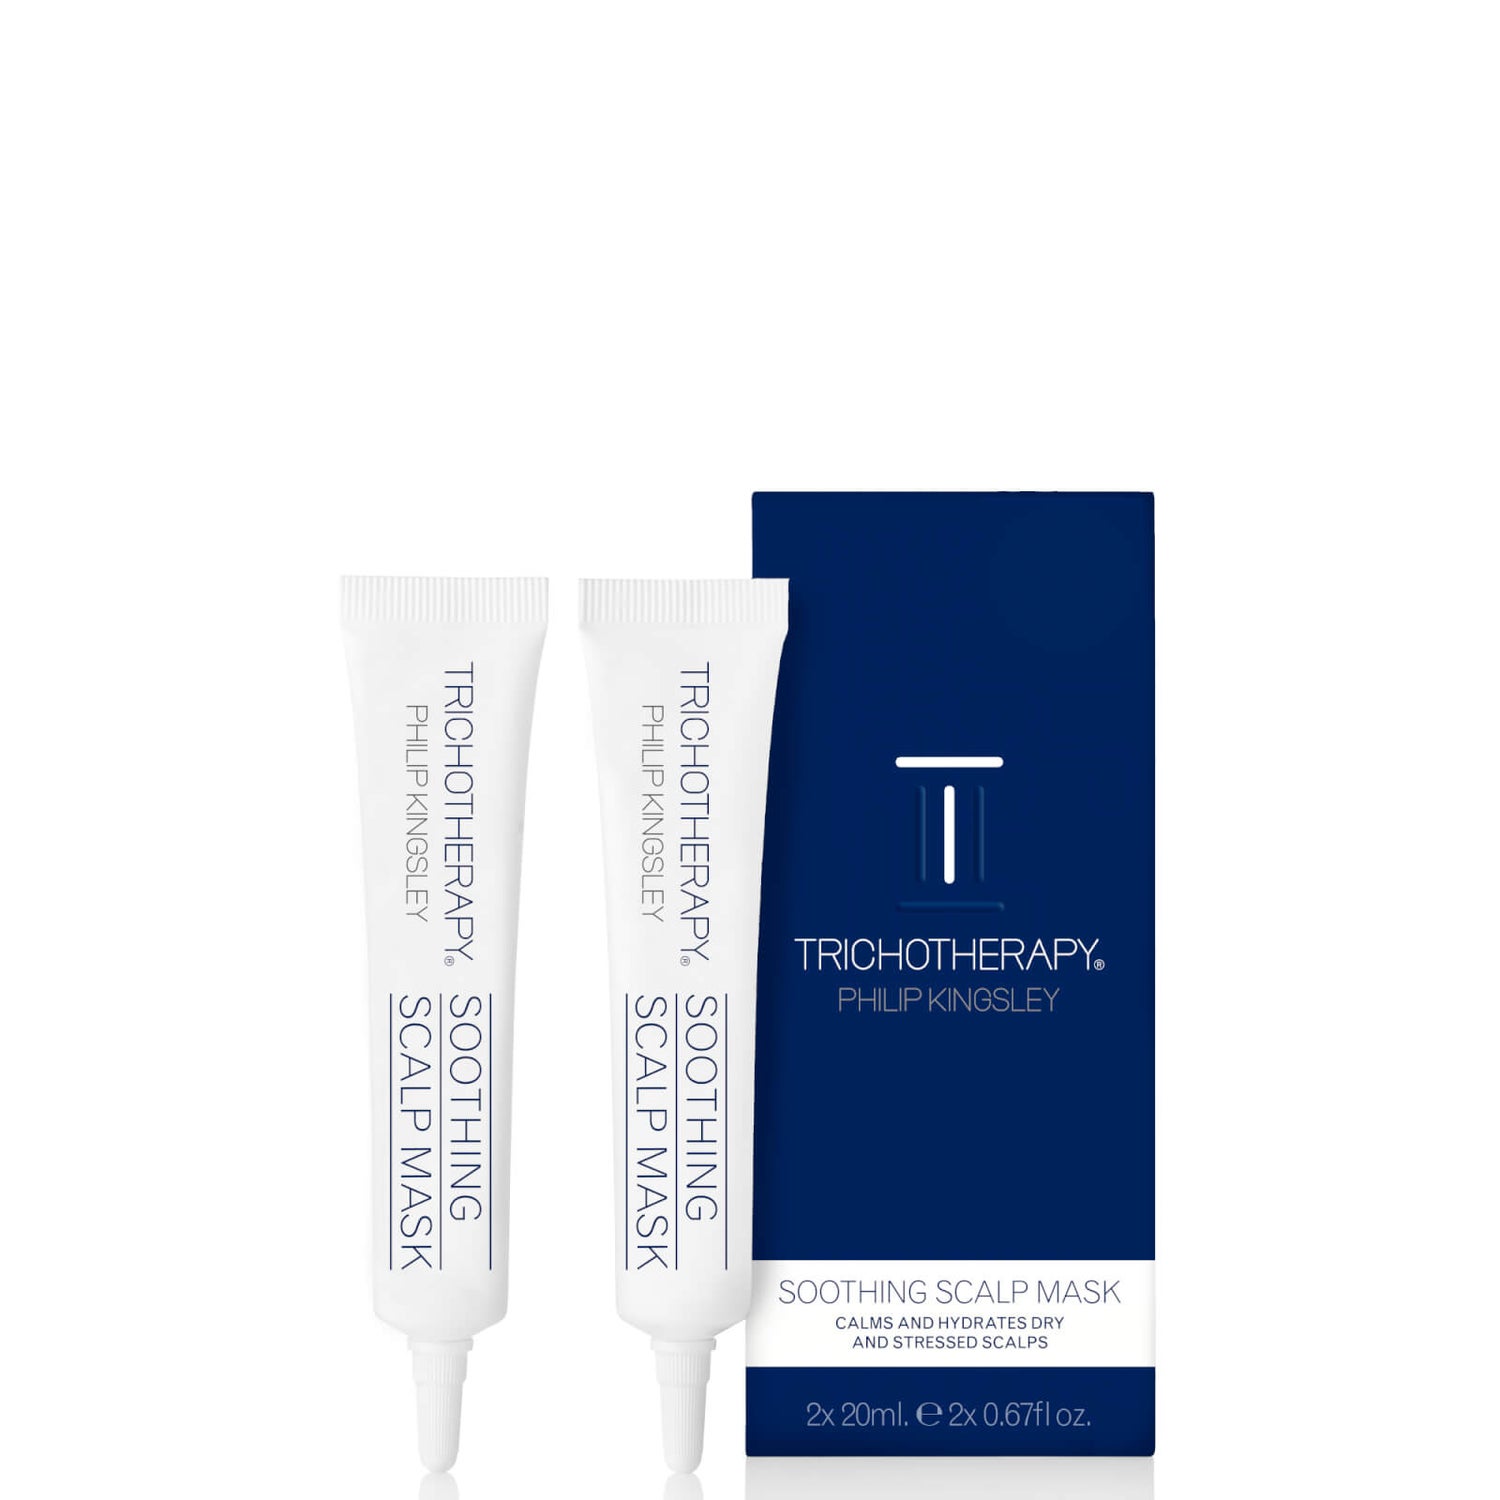 Philip Kingsley Trichotherapy Soothing Scalp Mask 2 x 20ml